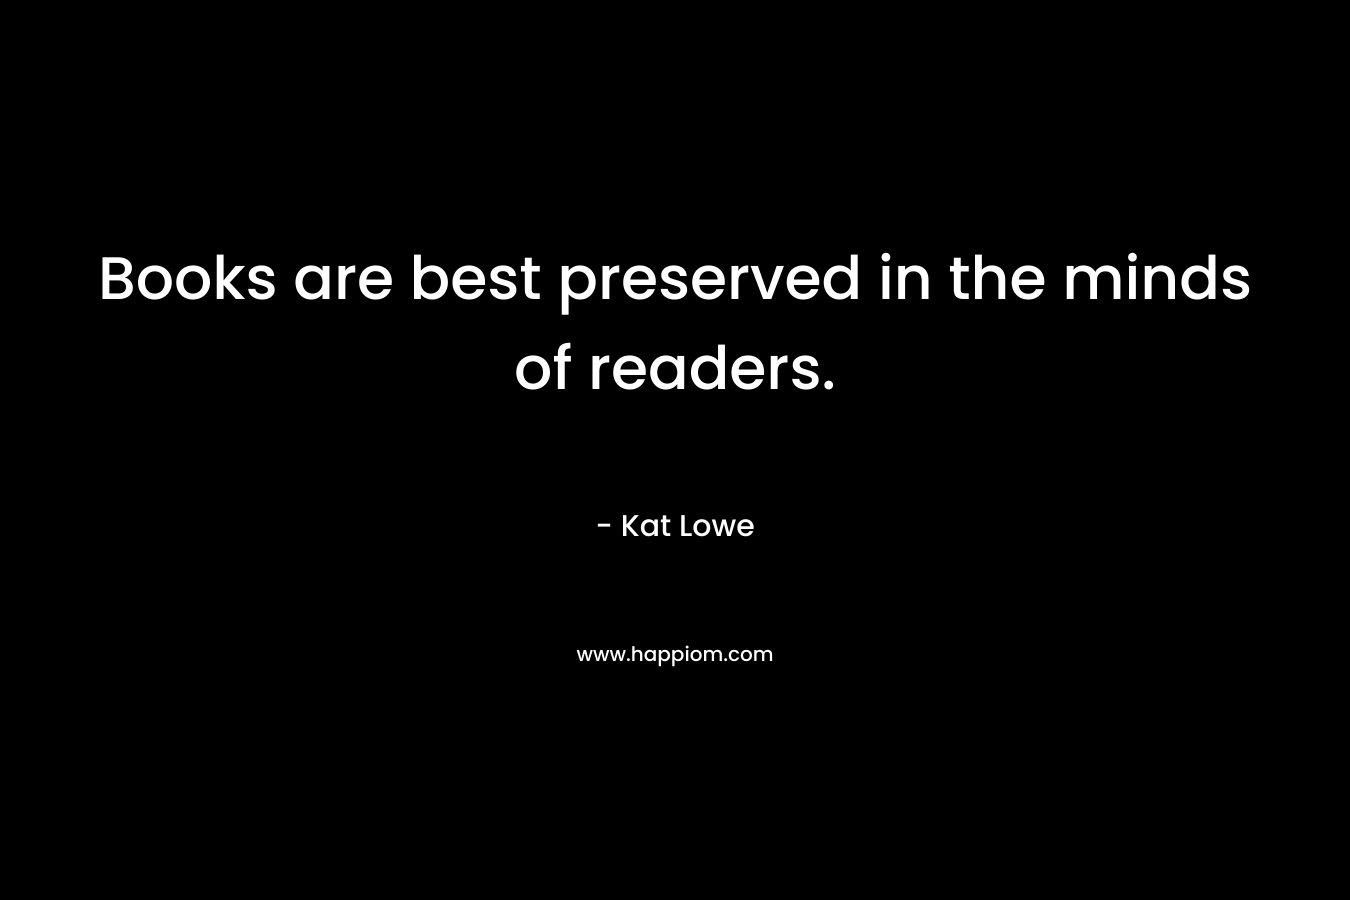 Books are best preserved in the minds of readers. – Kat Lowe